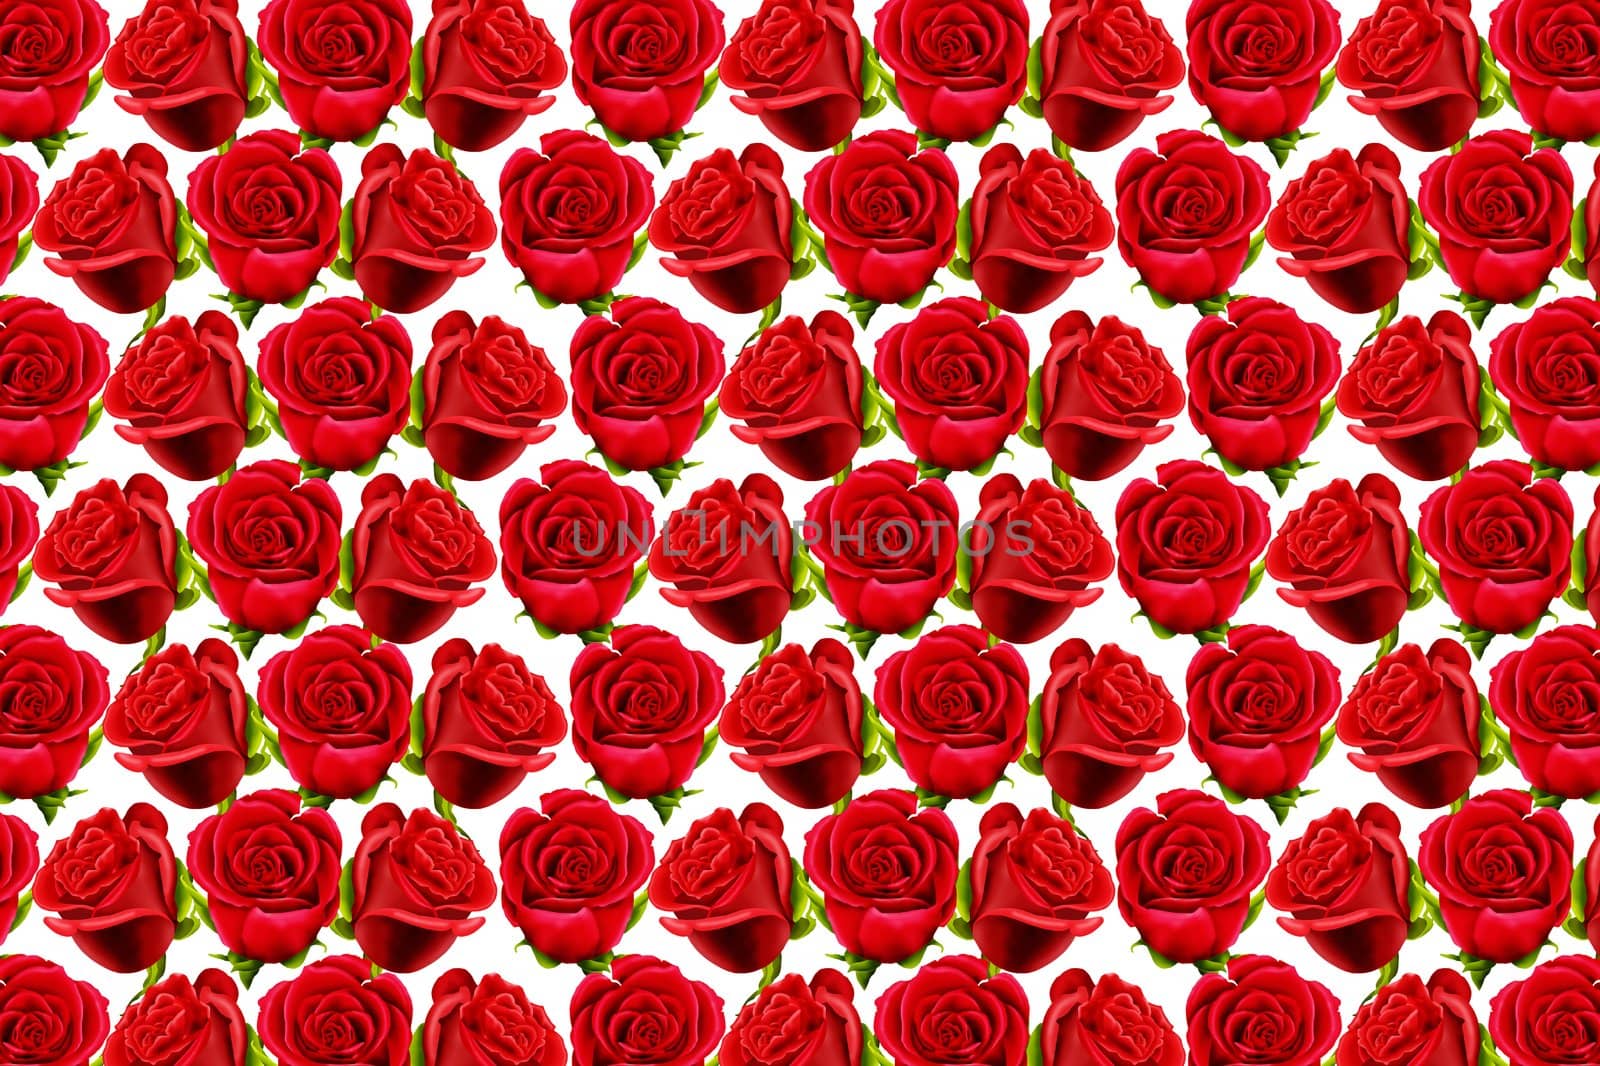 Wallpaper of red roses on a white background by acremead